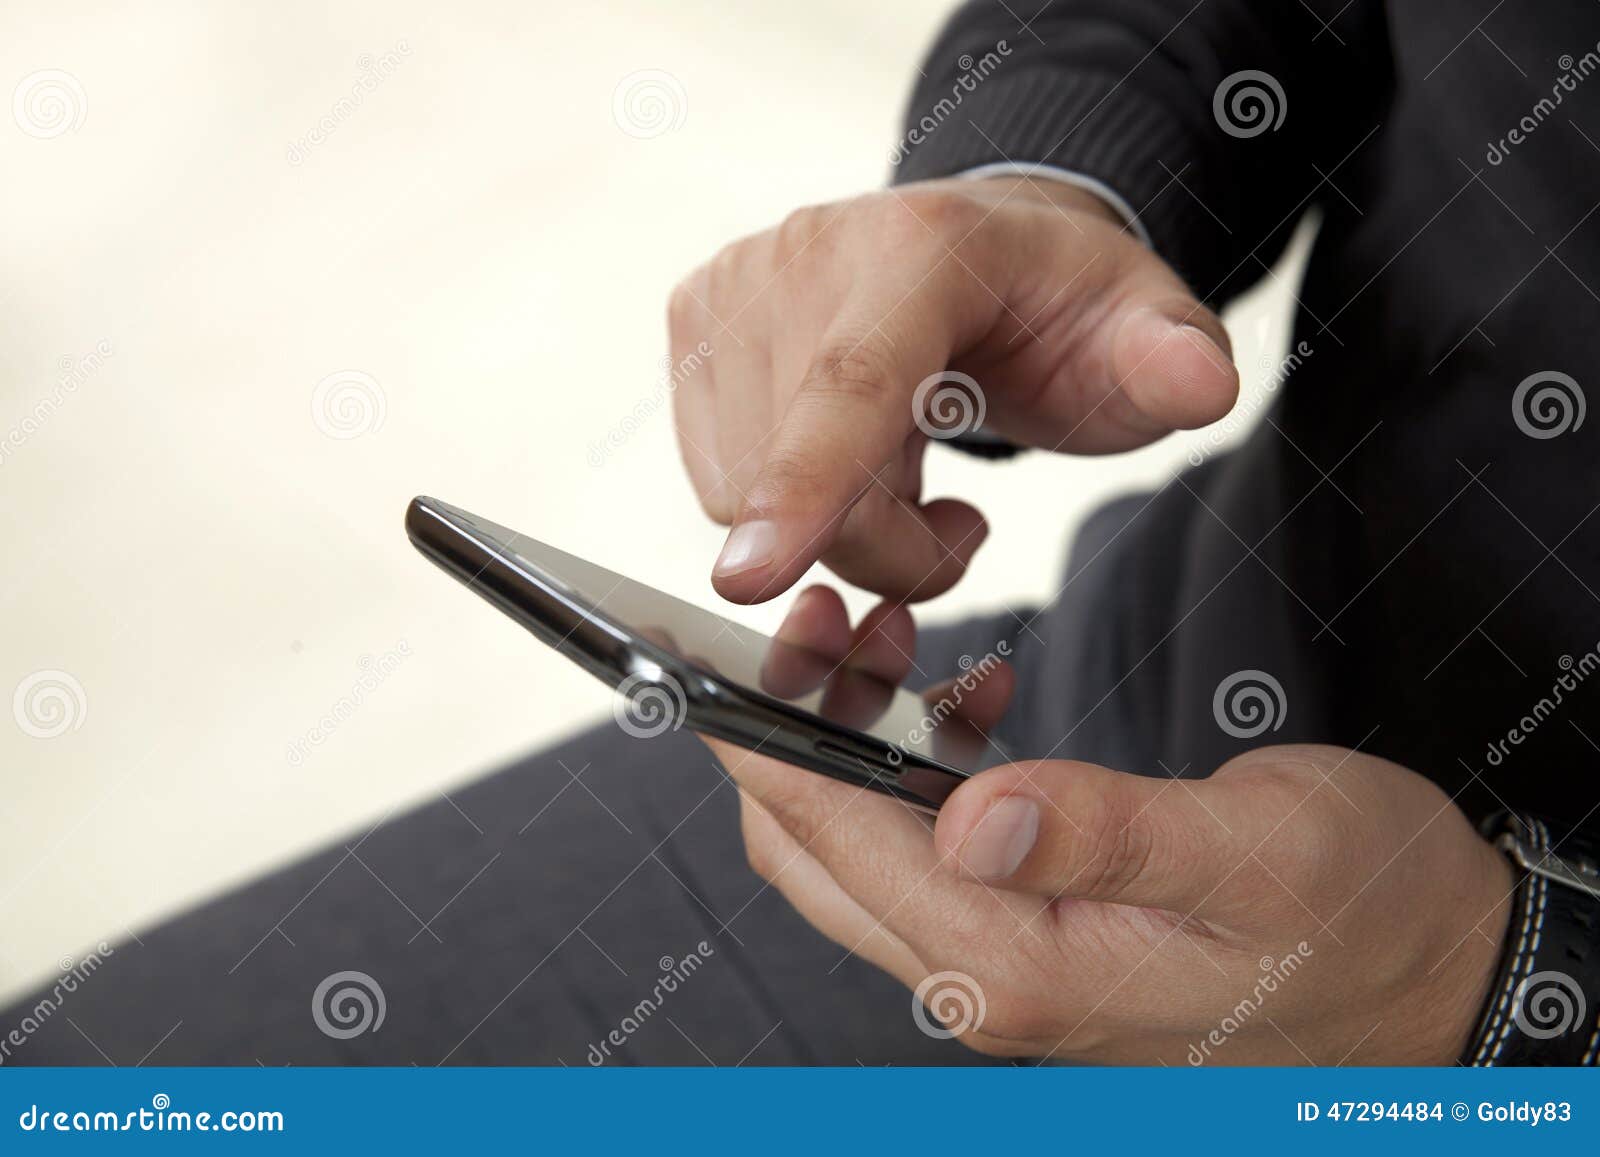 Touching a mobile phone stock photo. Image of black, gray - 47294484